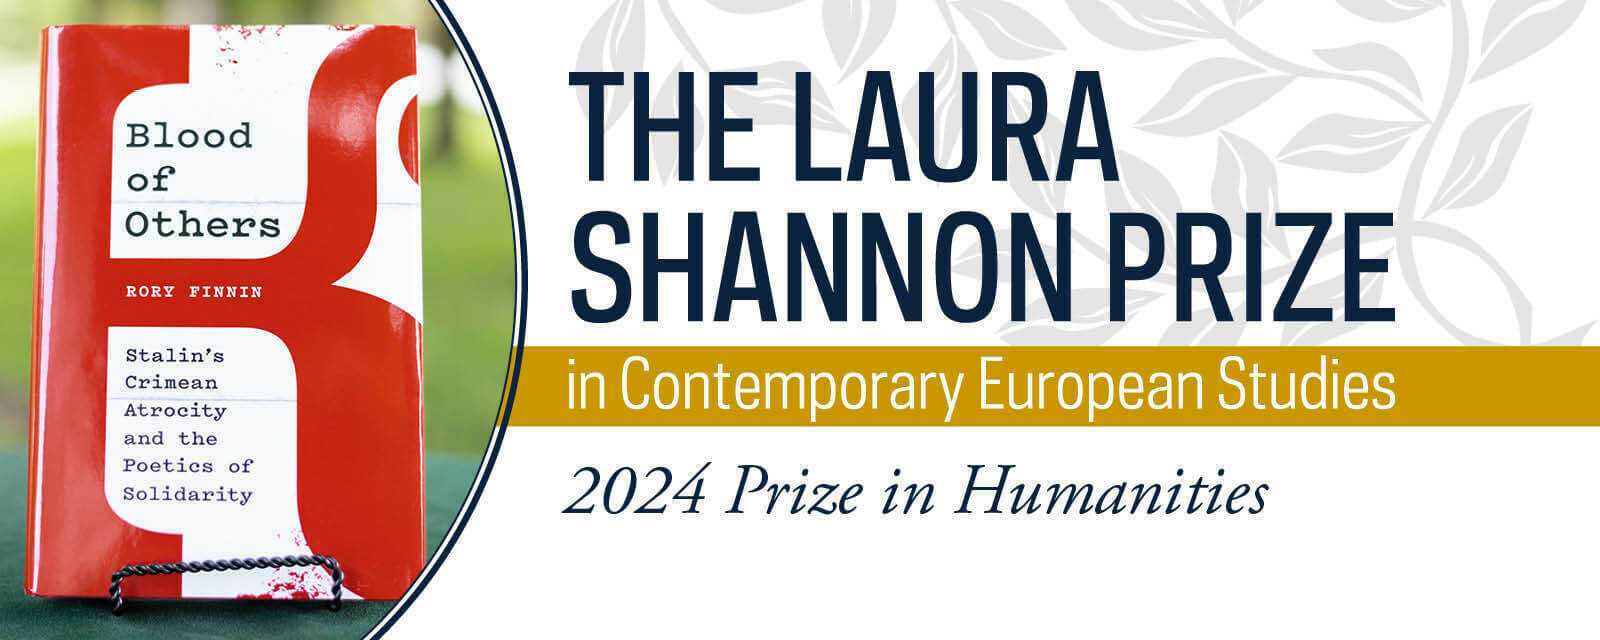 The Laura Shannon prize in Contemporary European Studies: